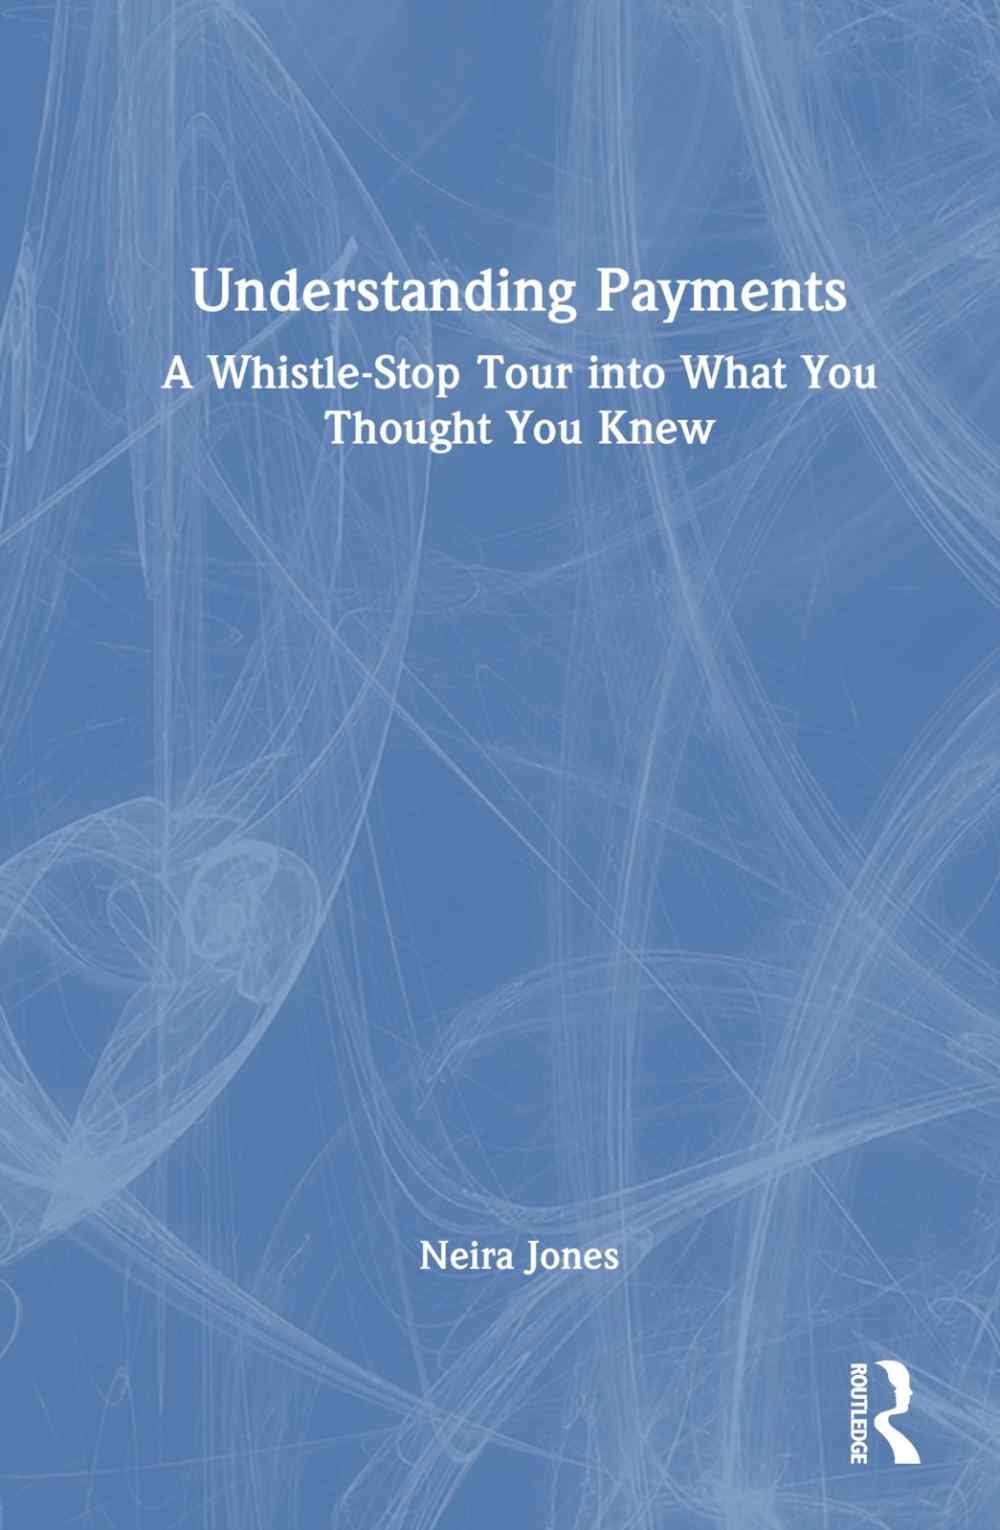 Understanding Payments: A Whistle-Stop Tour Into What You Thought You Knew